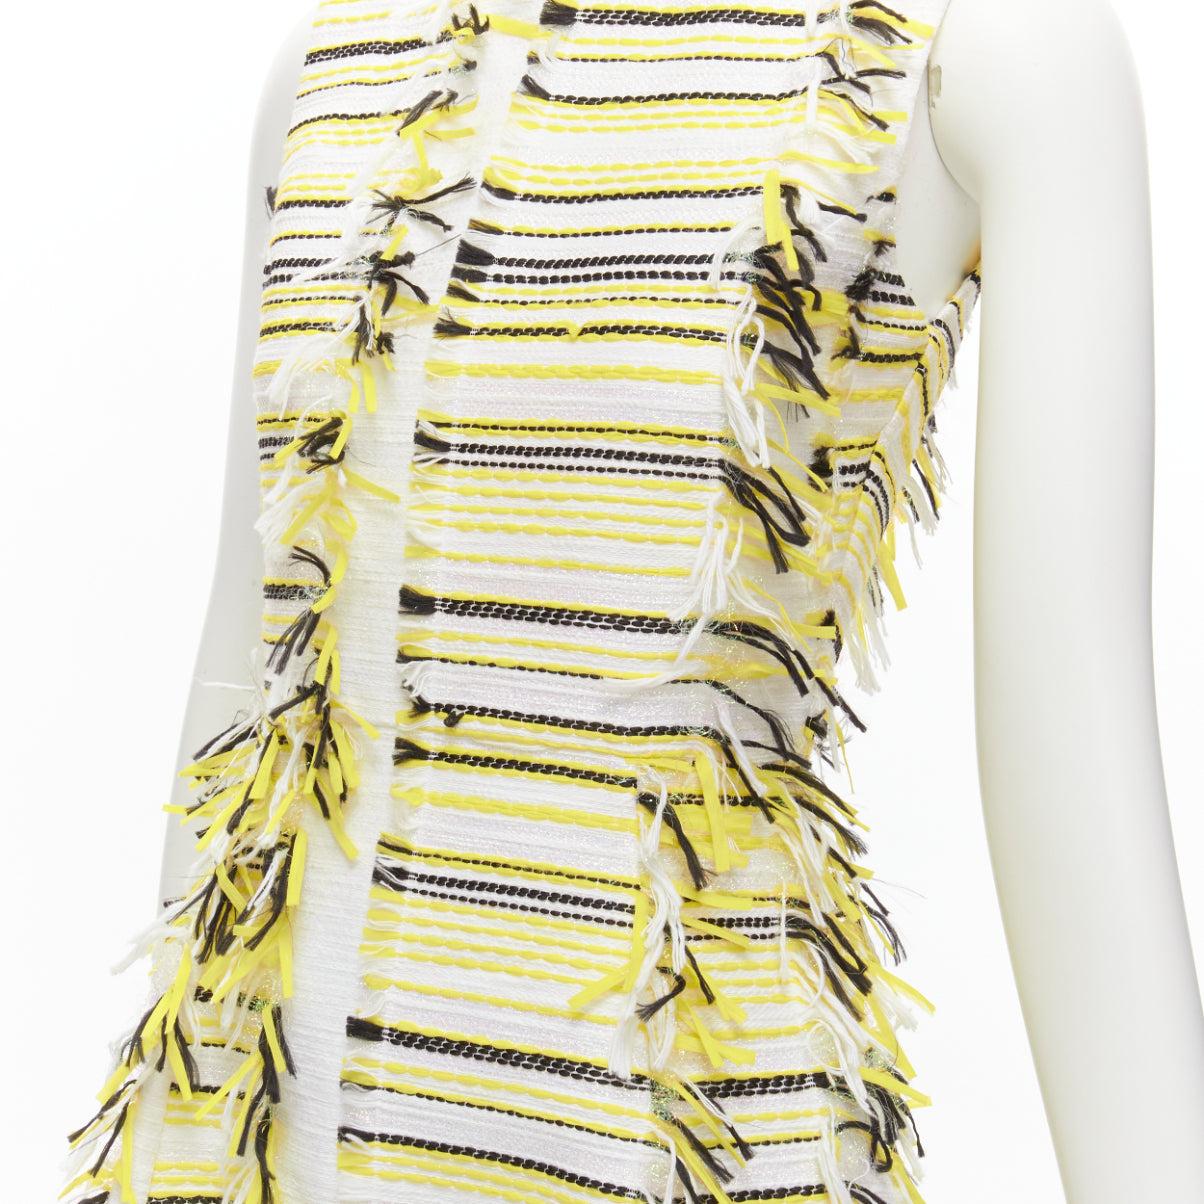 ANAIS JOURDEN yellow black lurex fringed tweed fit flared panelled dress FR36 S
Reference: BSHW/A00009
Brand: Anais Jourden
Material: Polyester, Blend
Color: Yellow, Black
Pattern: Striped
Closure: Zip
Made in: China

CONDITION:
Condition: